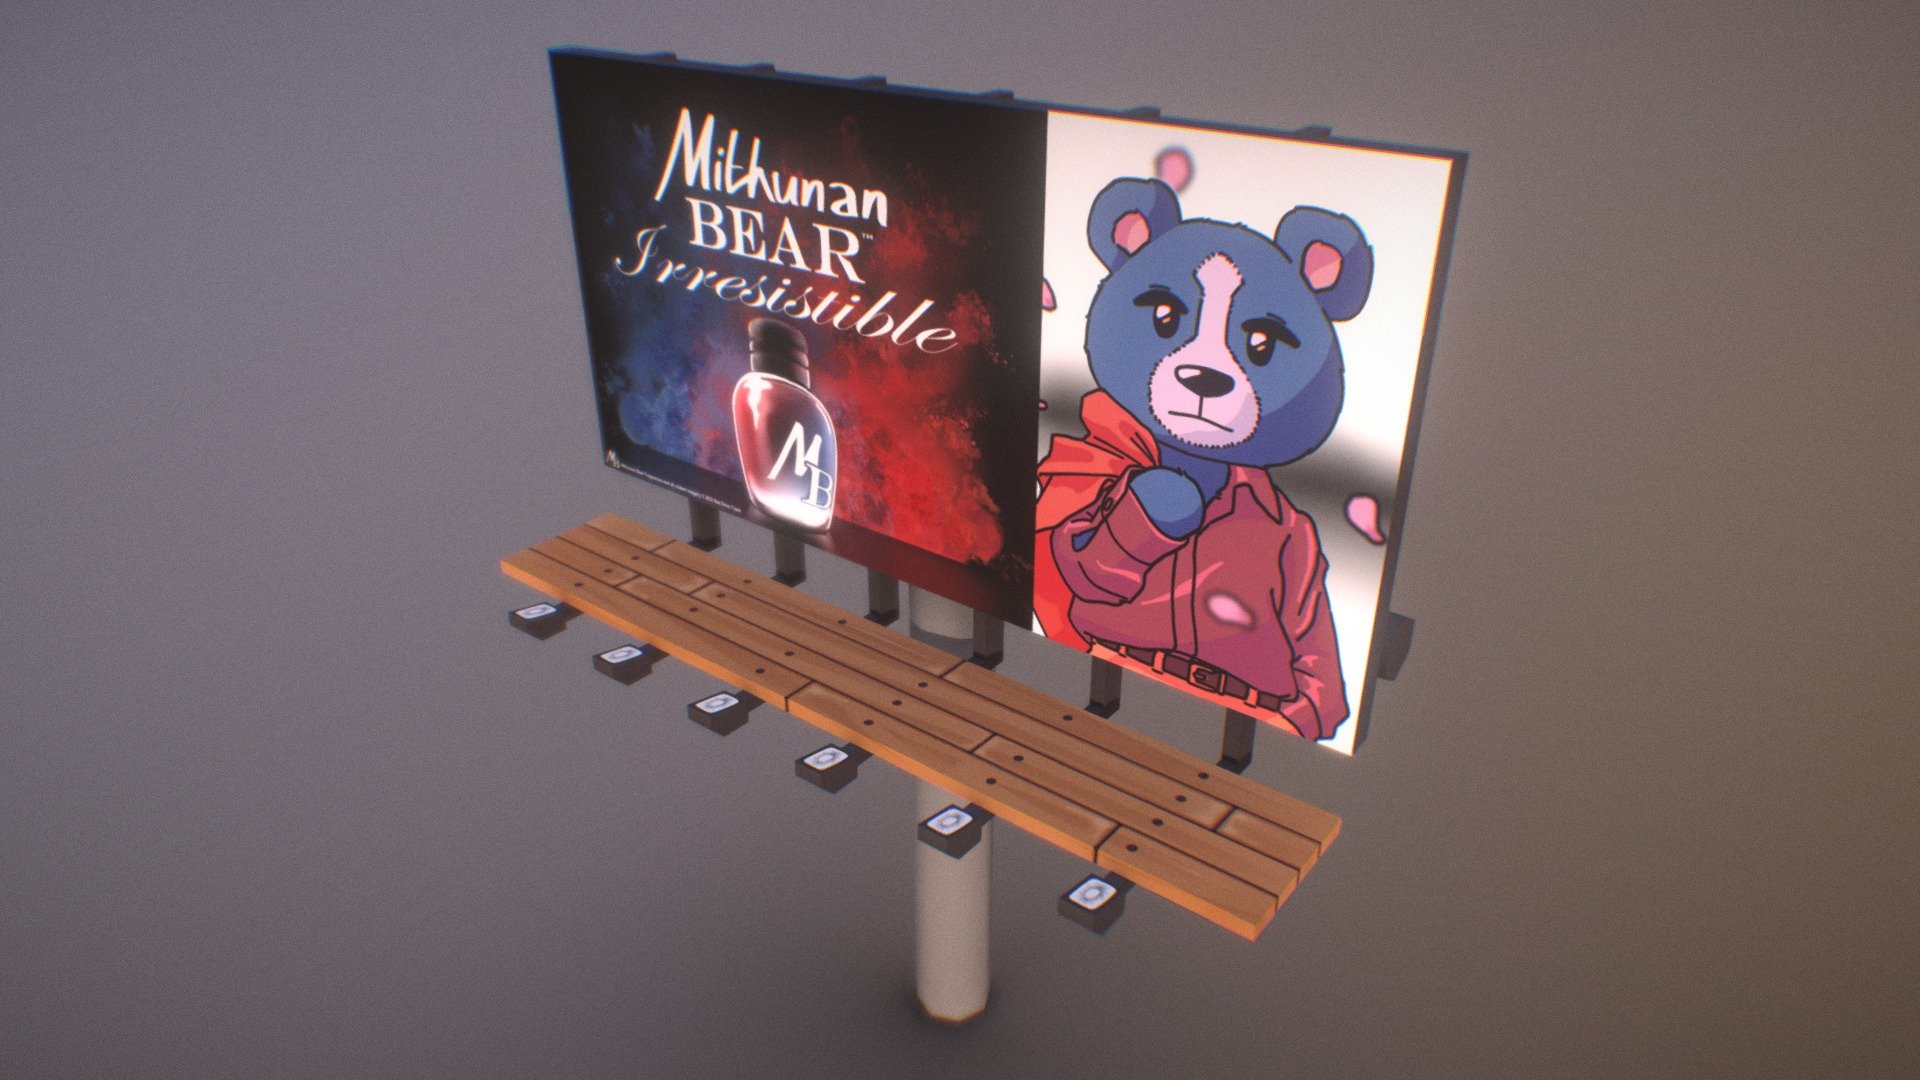 A billboard model for my group's GDW game. Featuring a certain bear illustration advertising an as of yet unreleased fragrance 3d model